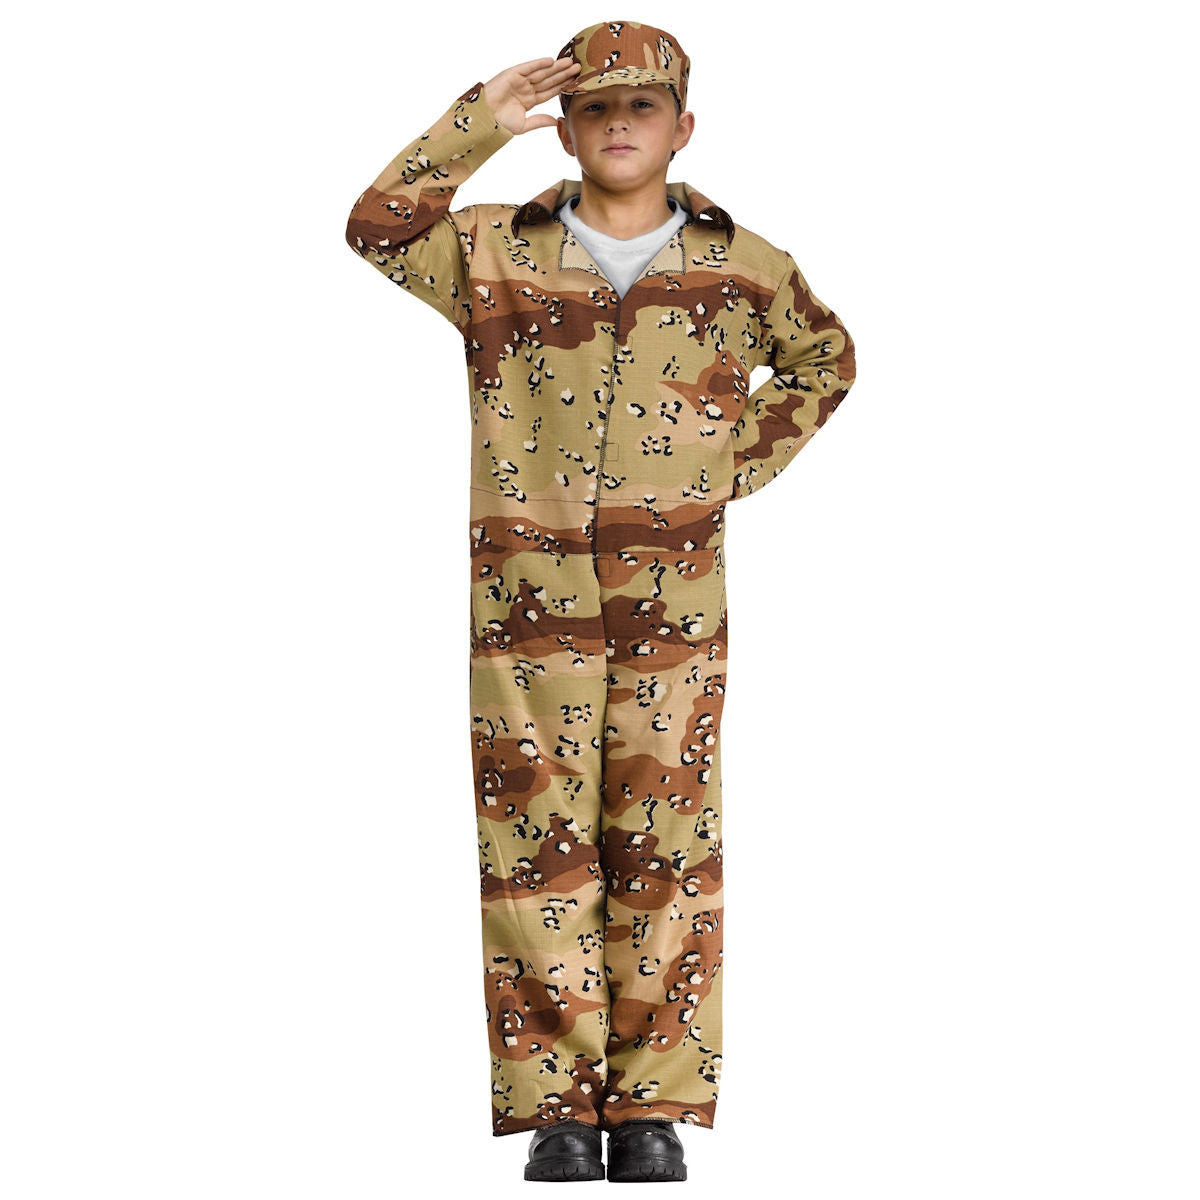 Commando Army Soldier Desert Camoflauge Boy's Costume Authentic Issue